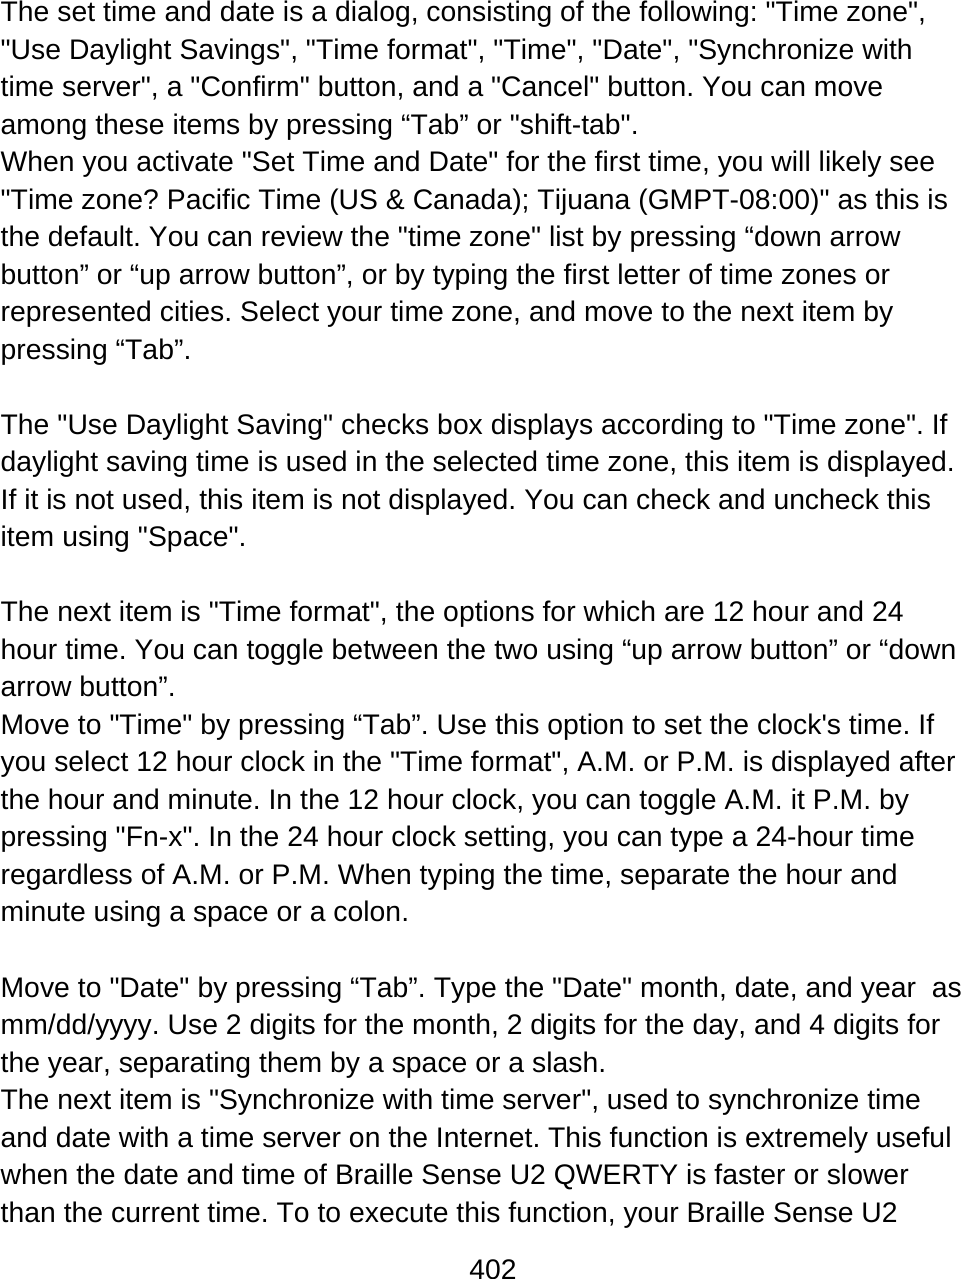 402   The set time and date is a dialog, consisting of the following: &quot;Time zone&quot;, &quot;Use Daylight Savings&quot;, &quot;Time format&quot;, &quot;Time&quot;, &quot;Date&quot;, &quot;Synchronize with time server&quot;, a &quot;Confirm&quot; button, and a &quot;Cancel&quot; button. You can move among these items by pressing “Tab” or &quot;shift-tab&quot;. When you activate &quot;Set Time and Date&quot; for the first time, you will likely see &quot;Time zone? Pacific Time (US &amp; Canada); Tijuana (GMPT-08:00)&quot; as this is the default. You can review the &quot;time zone&quot; list by pressing “down arrow button” or “up arrow button”, or by typing the first letter of time zones or represented cities. Select your time zone, and move to the next item by pressing “Tab”.   The &quot;Use Daylight Saving&quot; checks box displays according to &quot;Time zone&quot;. If daylight saving time is used in the selected time zone, this item is displayed. If it is not used, this item is not displayed. You can check and uncheck this item using &quot;Space&quot;.  The next item is &quot;Time format&quot;, the options for which are 12 hour and 24 hour time. You can toggle between the two using “up arrow button” or “down arrow button”.  Move to &quot;Time&quot; by pressing “Tab”. Use this option to set the clock&apos;s time. If you select 12 hour clock in the &quot;Time format&quot;, A.M. or P.M. is displayed after the hour and minute. In the 12 hour clock, you can toggle A.M. it P.M. by pressing &quot;Fn-x&quot;. In the 24 hour clock setting, you can type a 24-hour time regardless of A.M. or P.M. When typing the time, separate the hour and minute using a space or a colon.   Move to &quot;Date&quot; by pressing “Tab”. Type the &quot;Date&quot; month, date, and year  as mm/dd/yyyy. Use 2 digits for the month, 2 digits for the day, and 4 digits for the year, separating them by a space or a slash.  The next item is &quot;Synchronize with time server&quot;, used to synchronize time and date with a time server on the Internet. This function is extremely useful when the date and time of Braille Sense U2 QWERTY is faster or slower than the current time. To to execute this function, your Braille Sense U2 